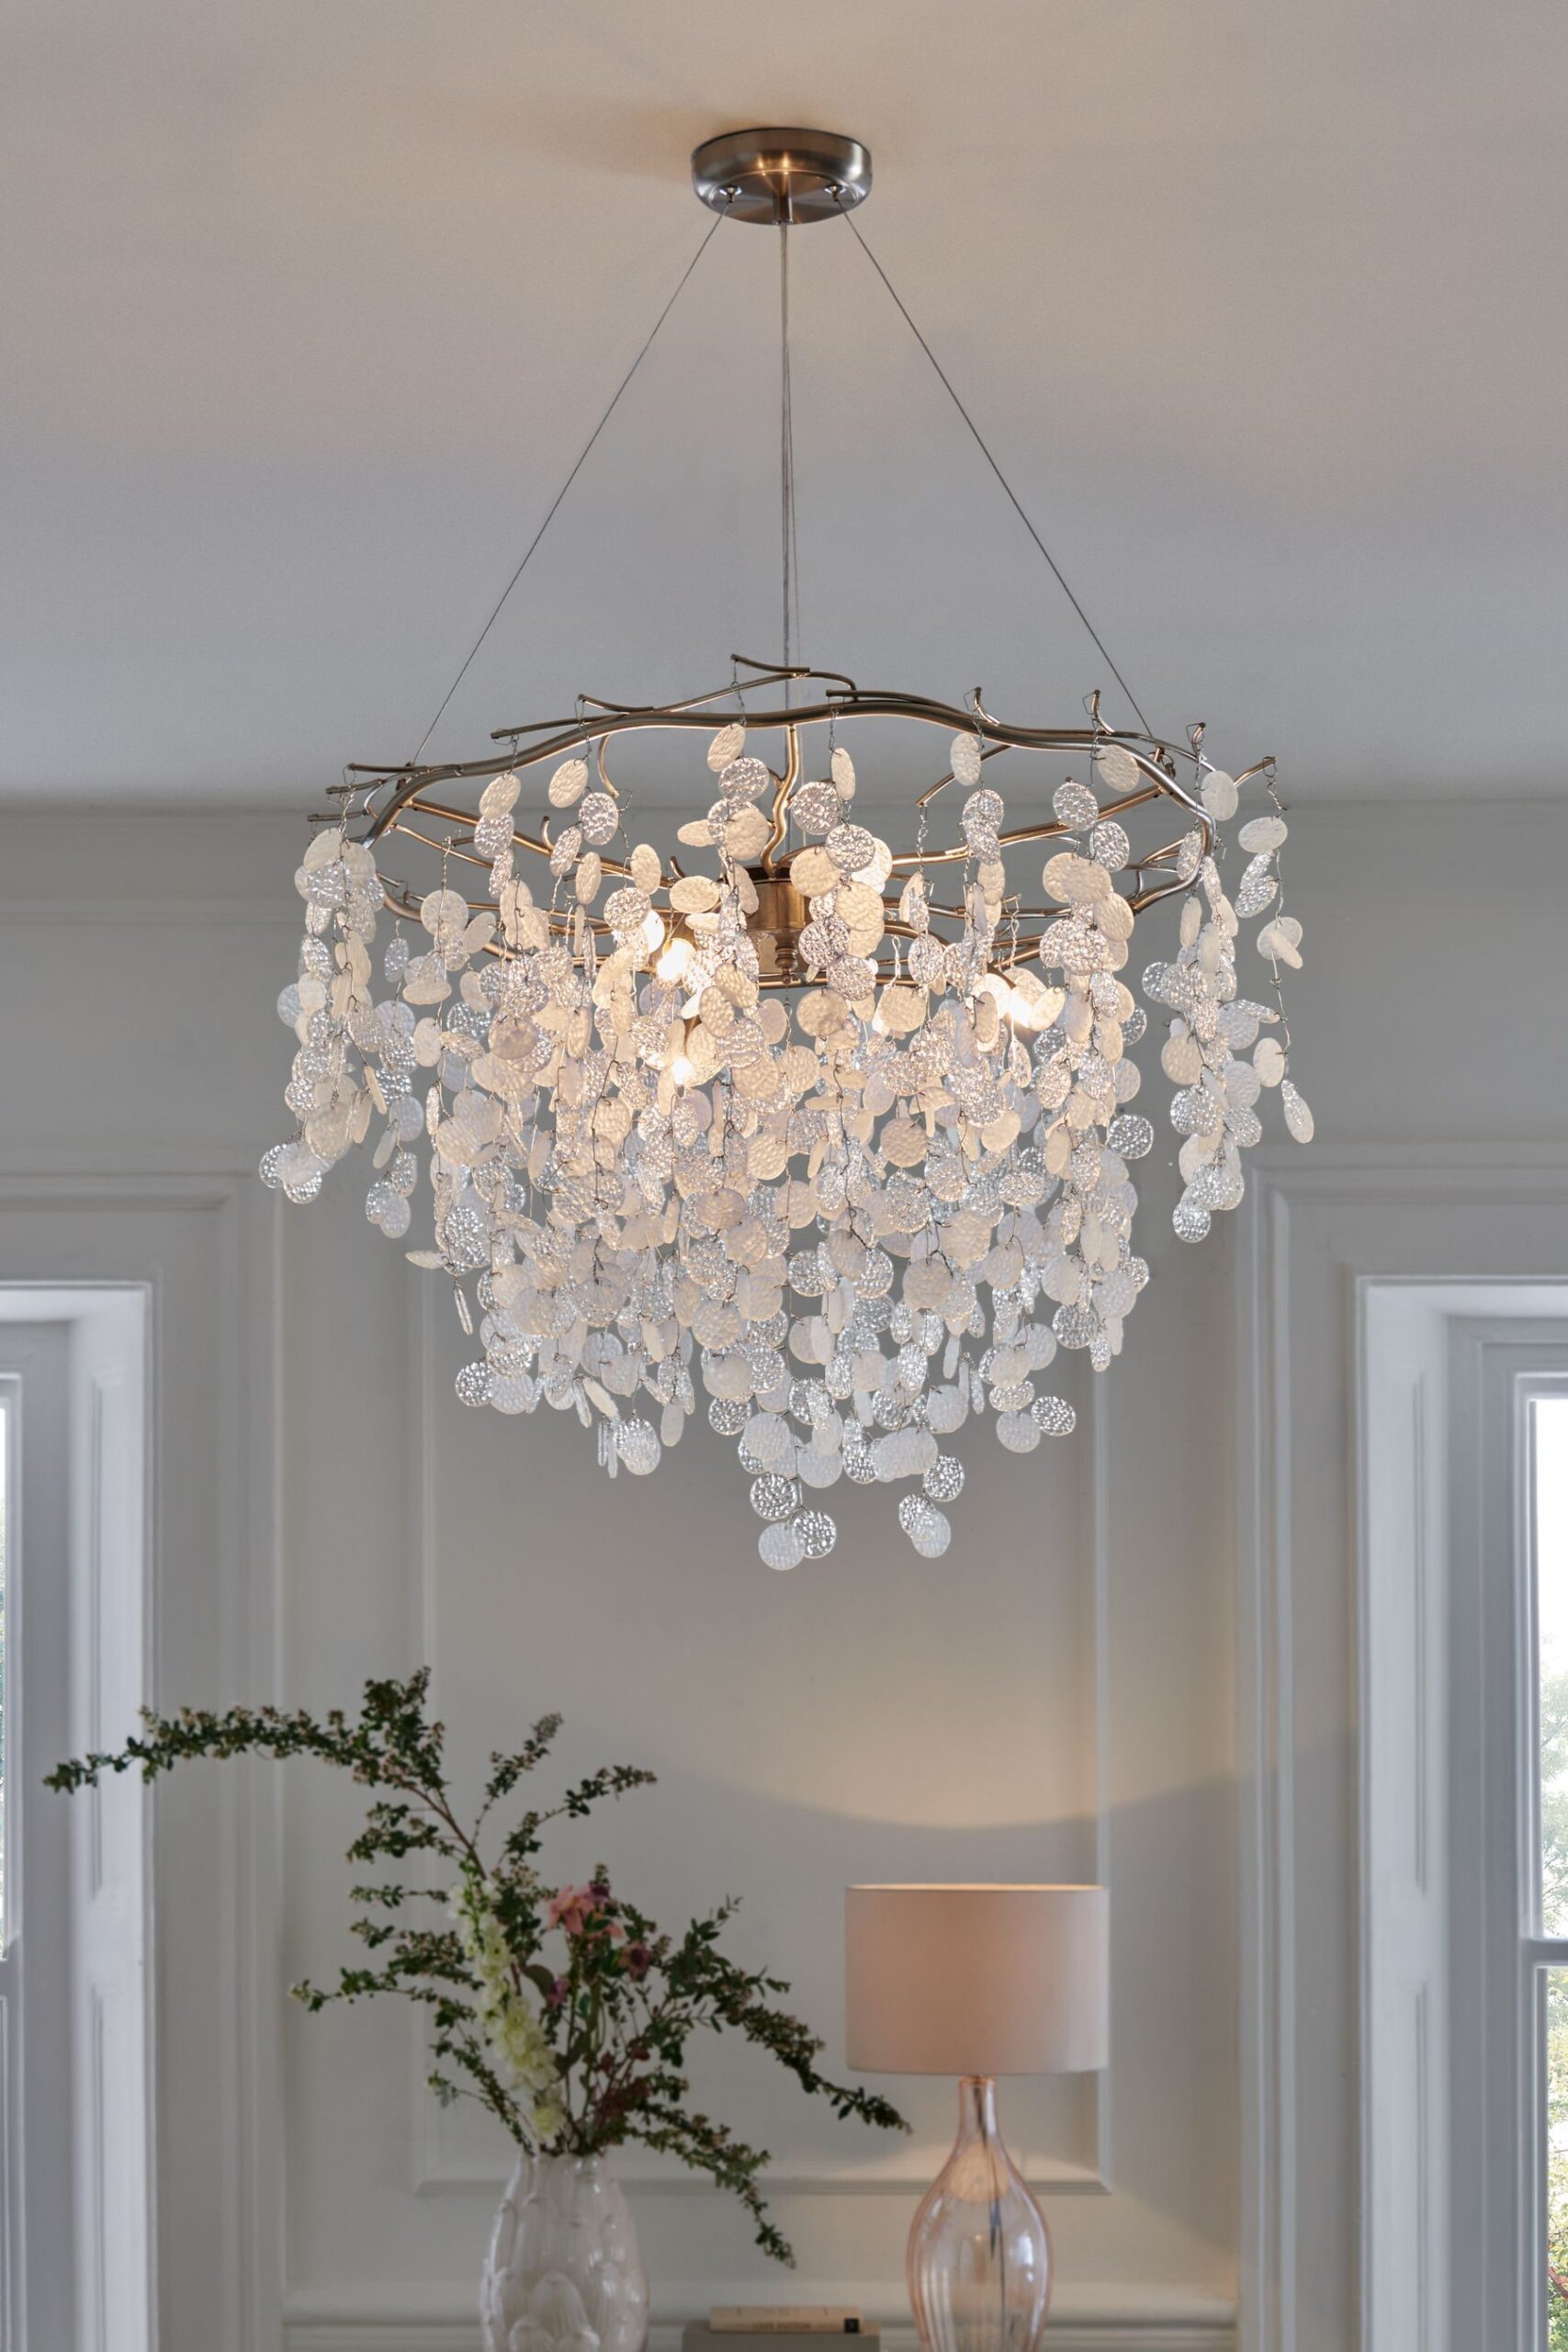 Buying Chandeliers Online The Ultimate Guide to Purchasing Stunning Chandeliers Online